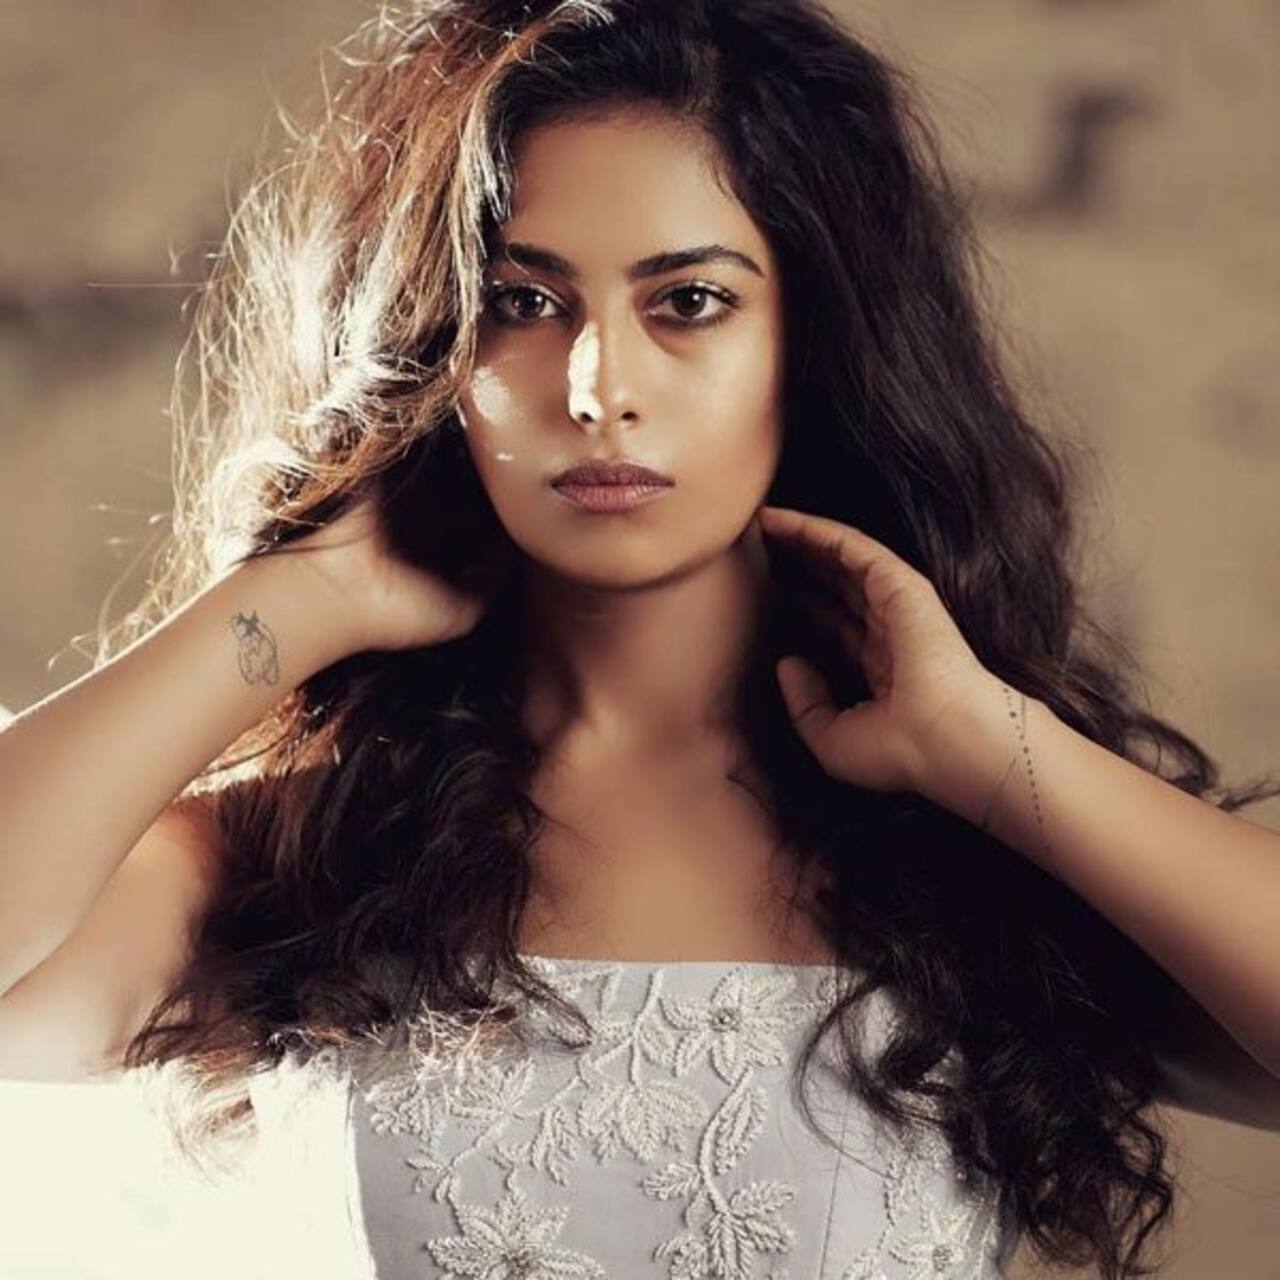 Sasural Simar Ka actress Avika Gor is a sight to behold in these pictures